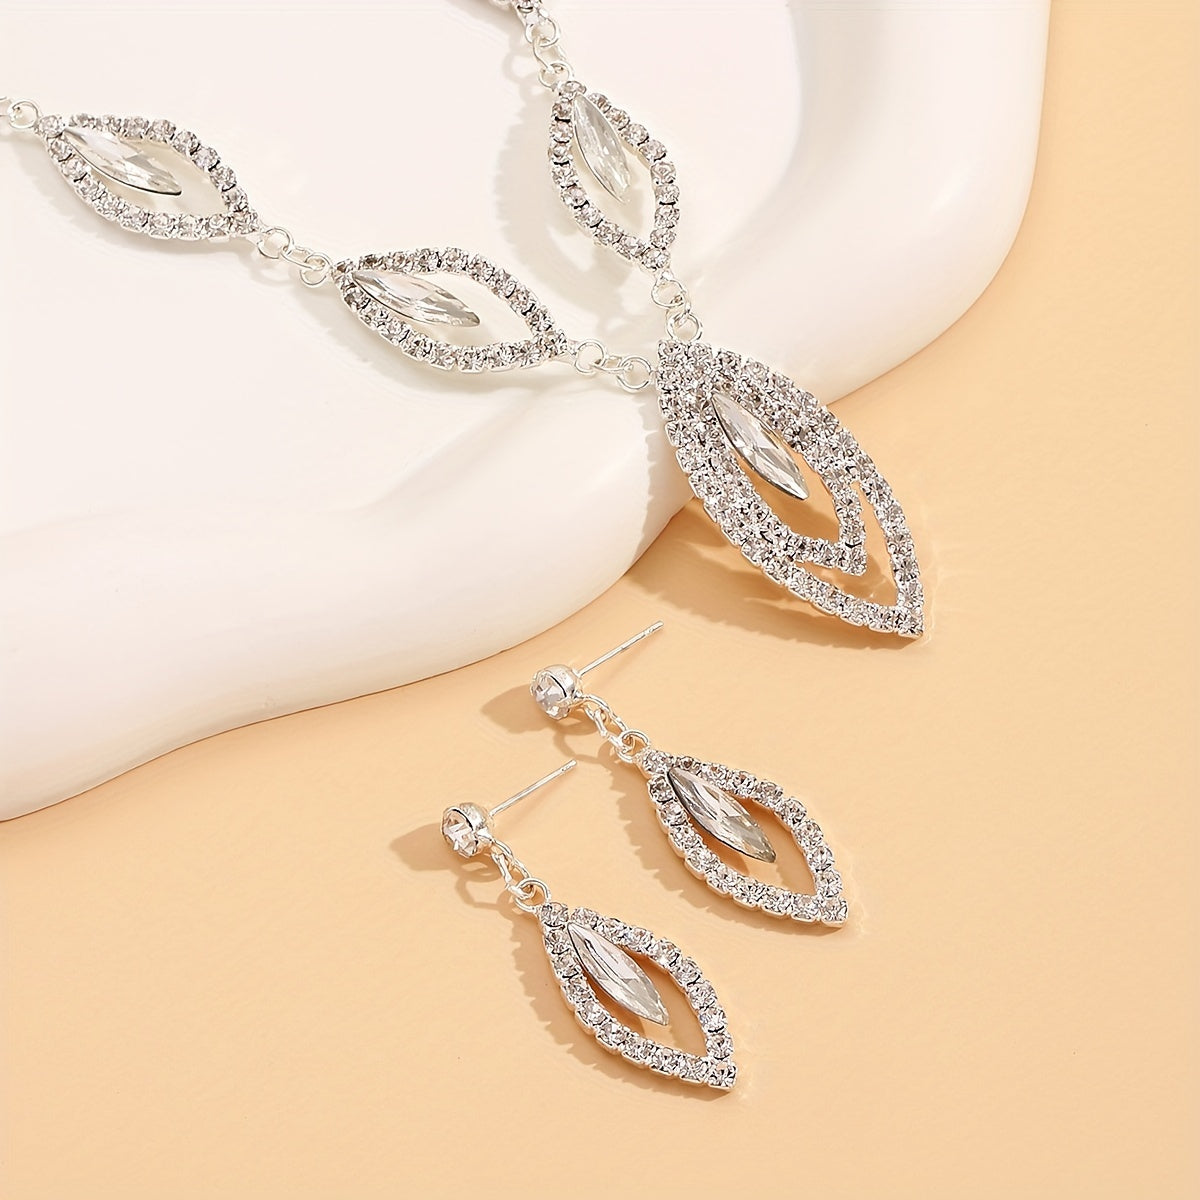 Elegant Hollow Out Jewelry Set for Weddings and Special Occasions - Includes Pendant Necklace and Dangle Earrings